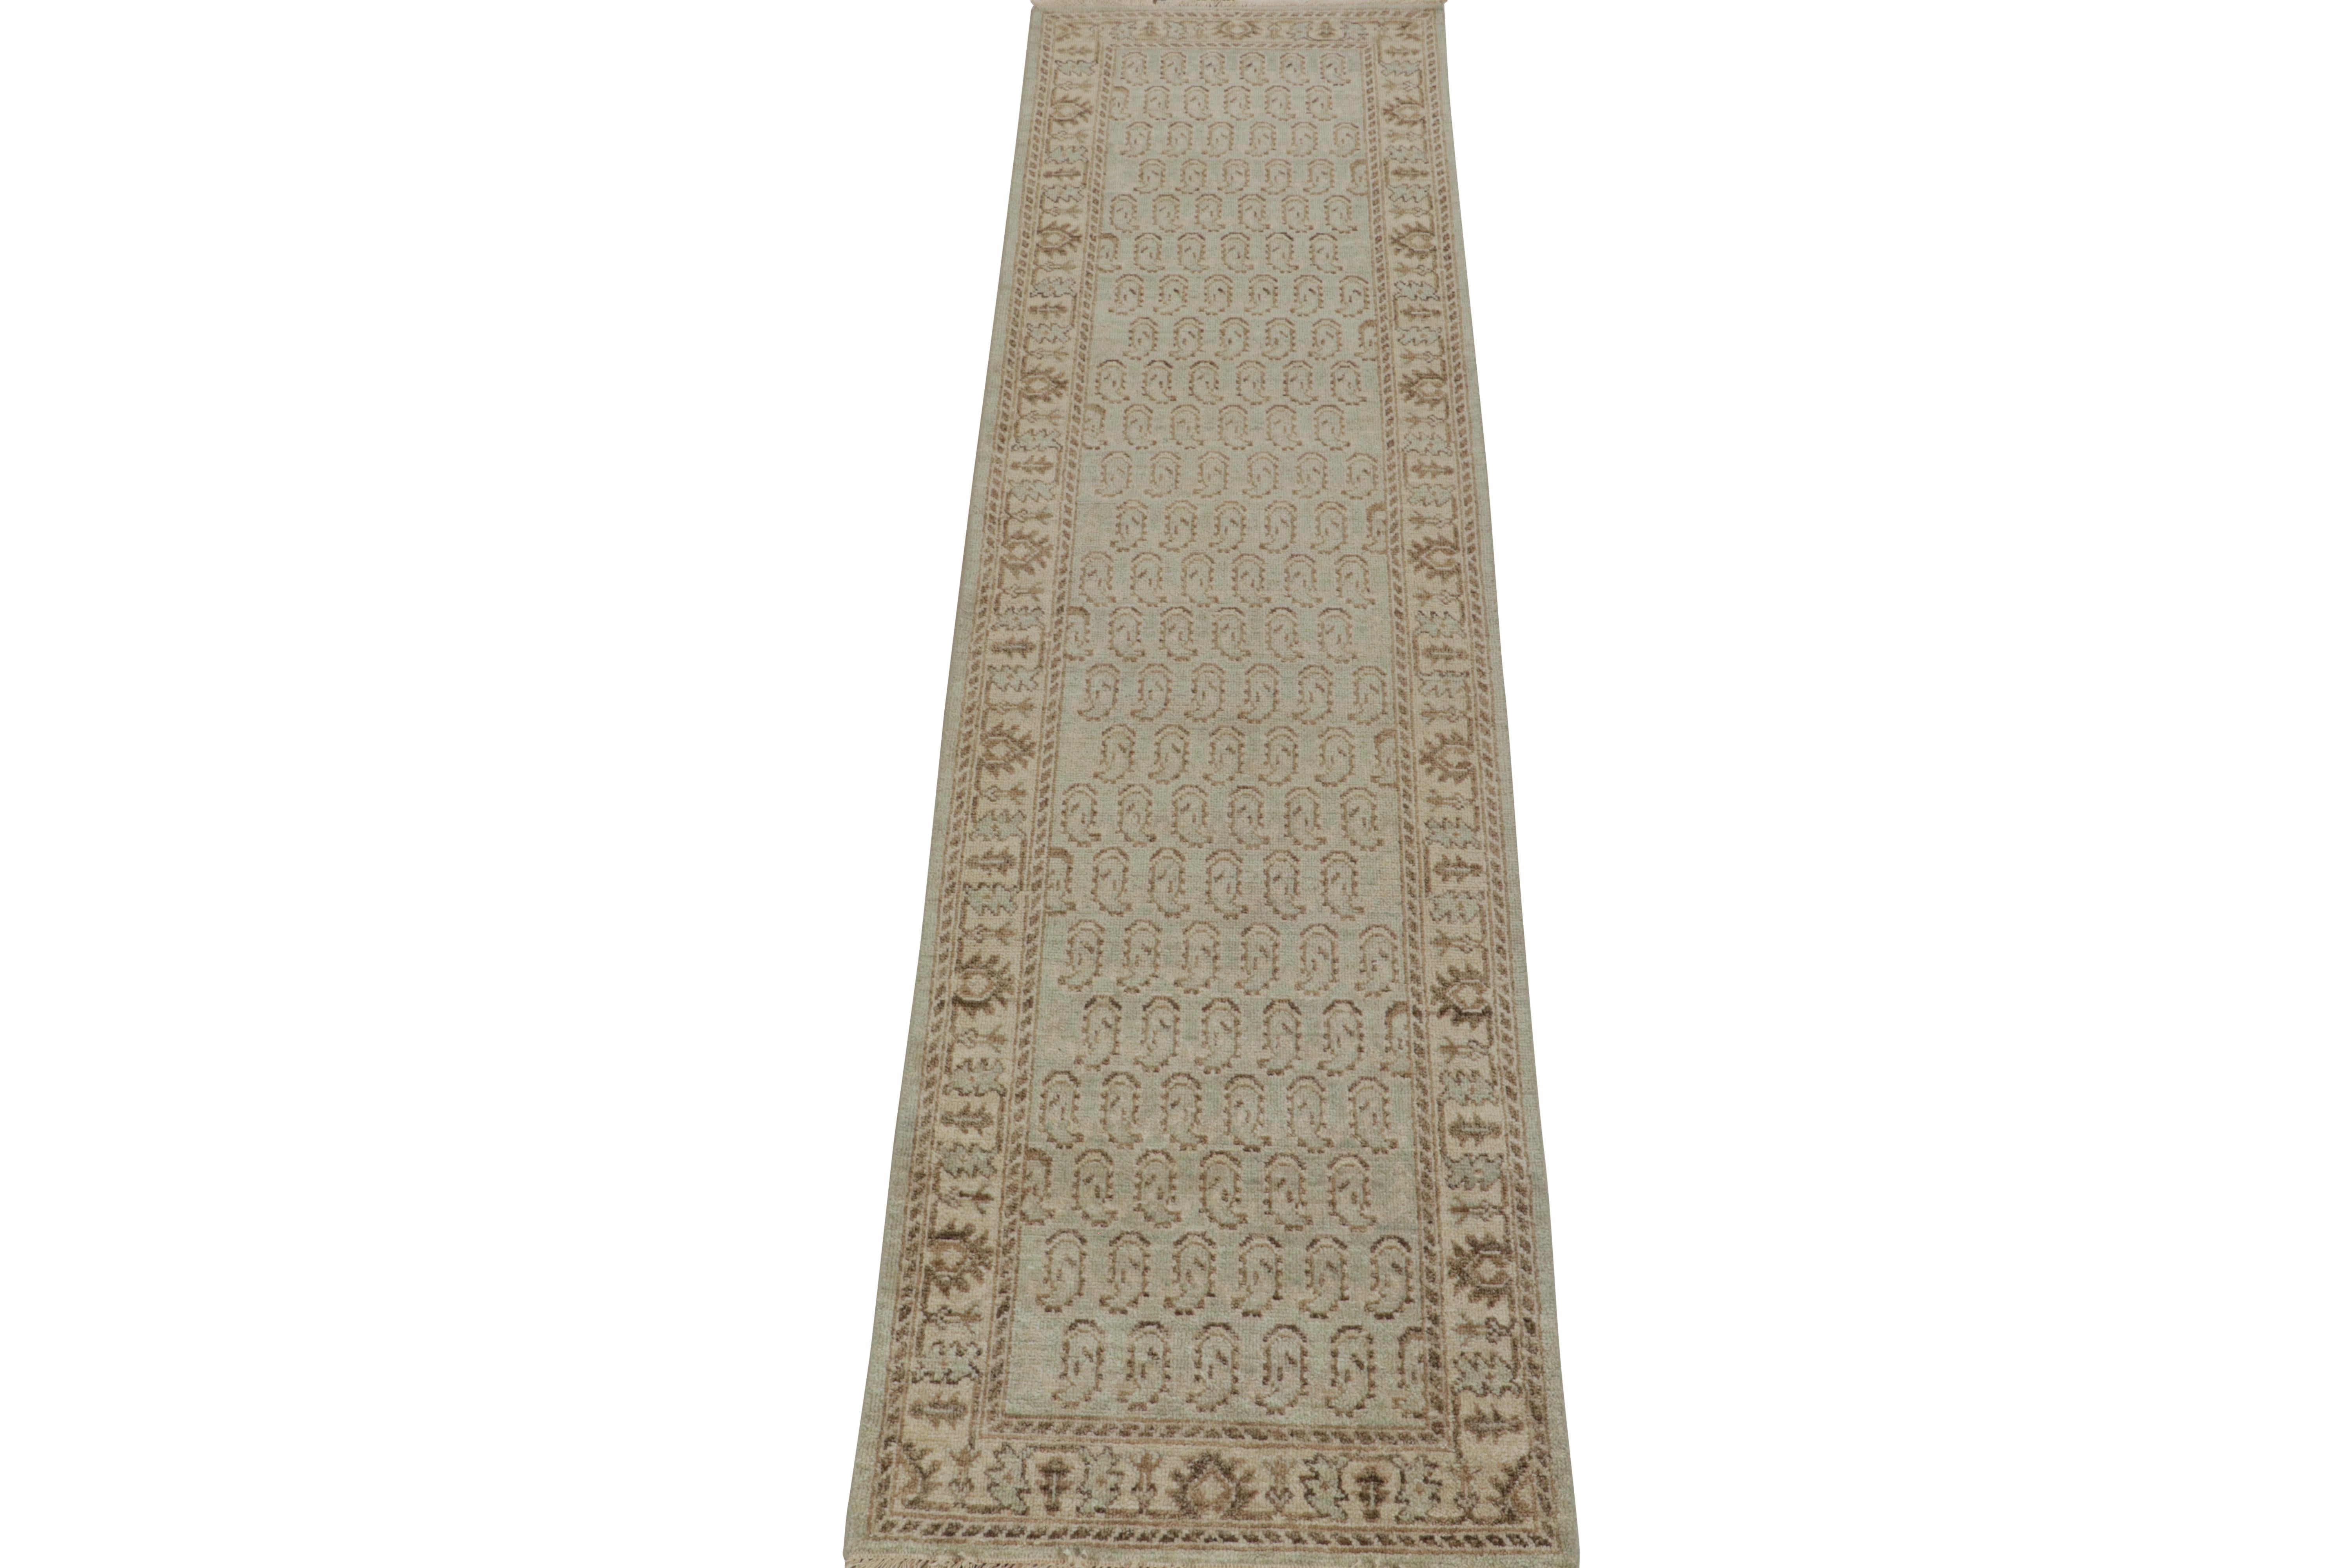 This contemporary 3x10 runner is a new addition to Rug & Kilim's Homage Collection. Hand-knotted in wool and cotton, it recaptures caucasian tribal patterns in soft colors and approachable demeanor.
Further on the Design:
This particular rug